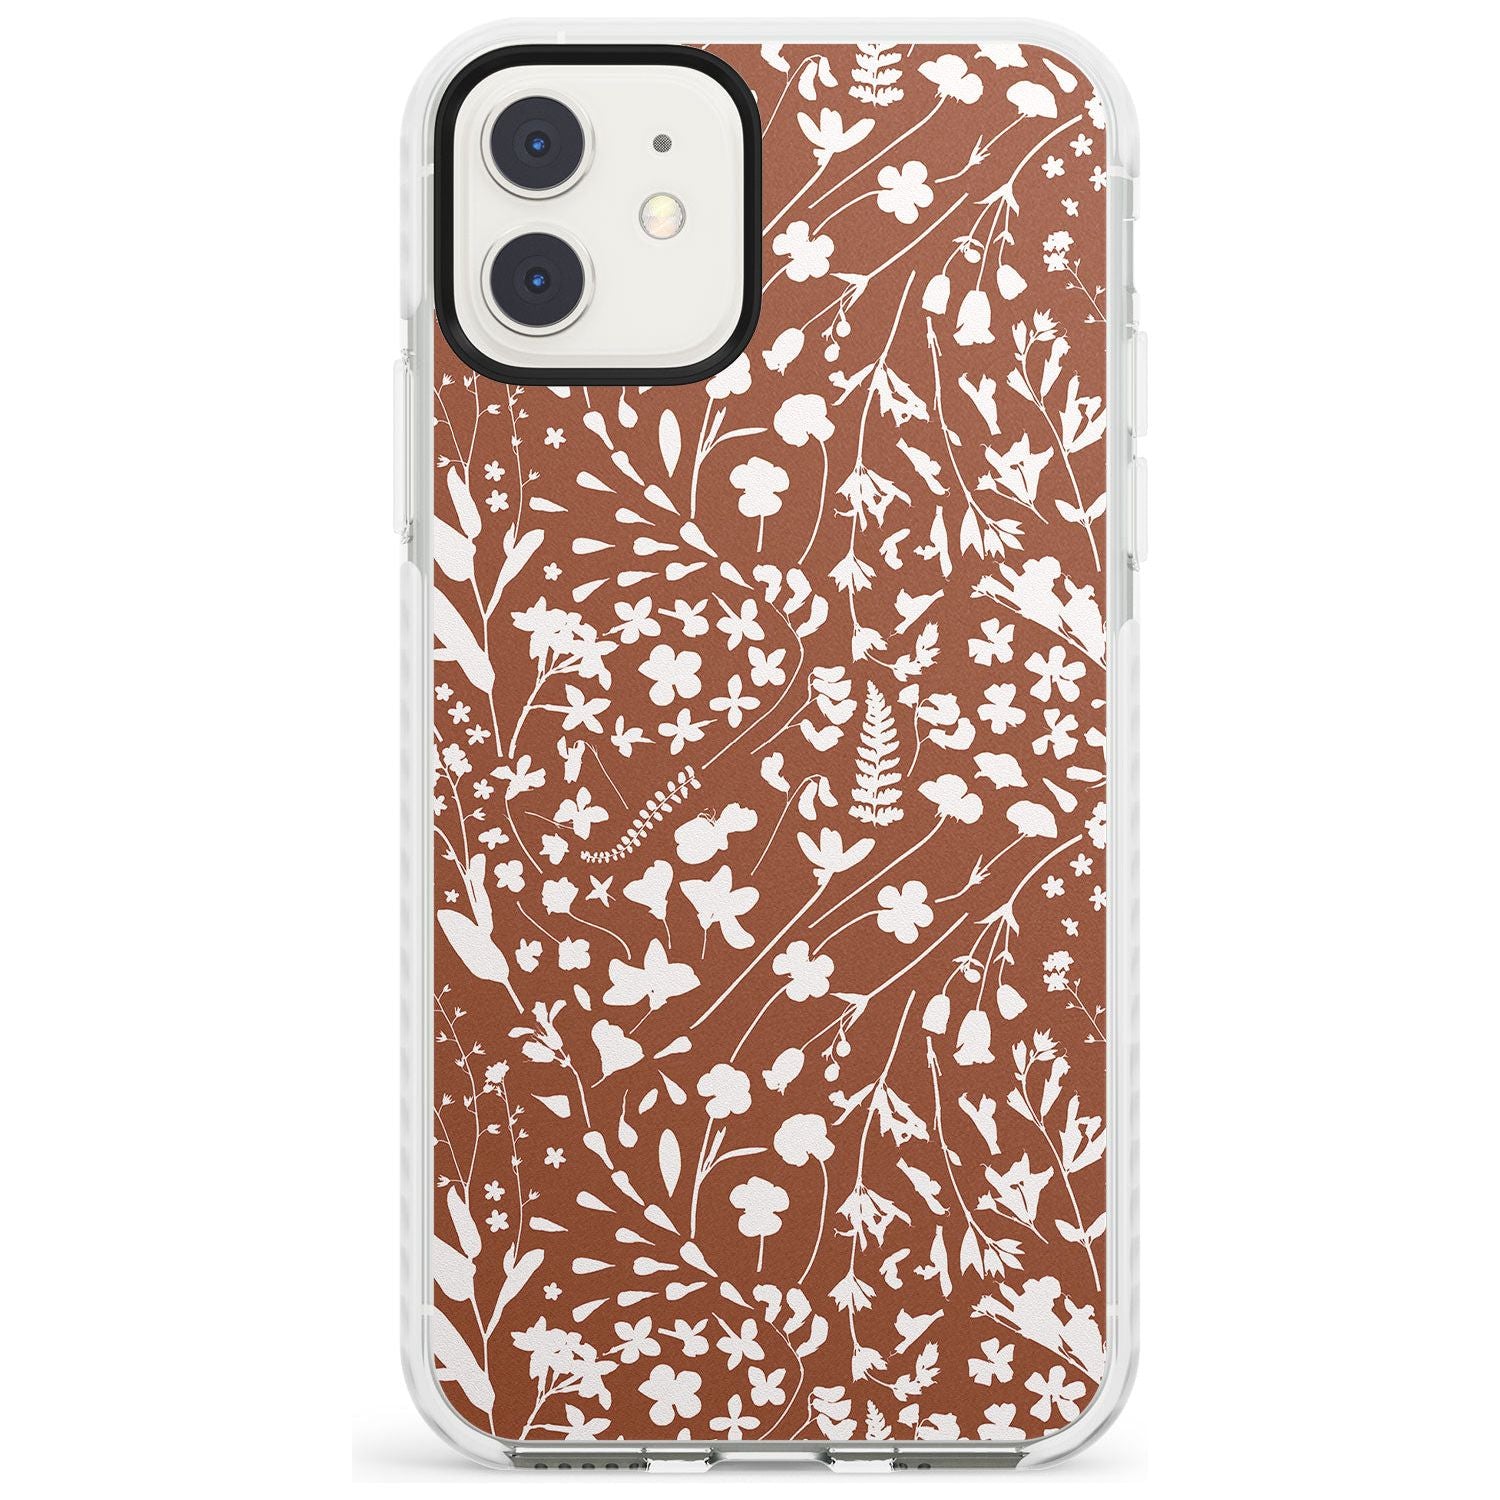 Wildflower Cluster on Terracotta Impact Phone Case for iPhone 11